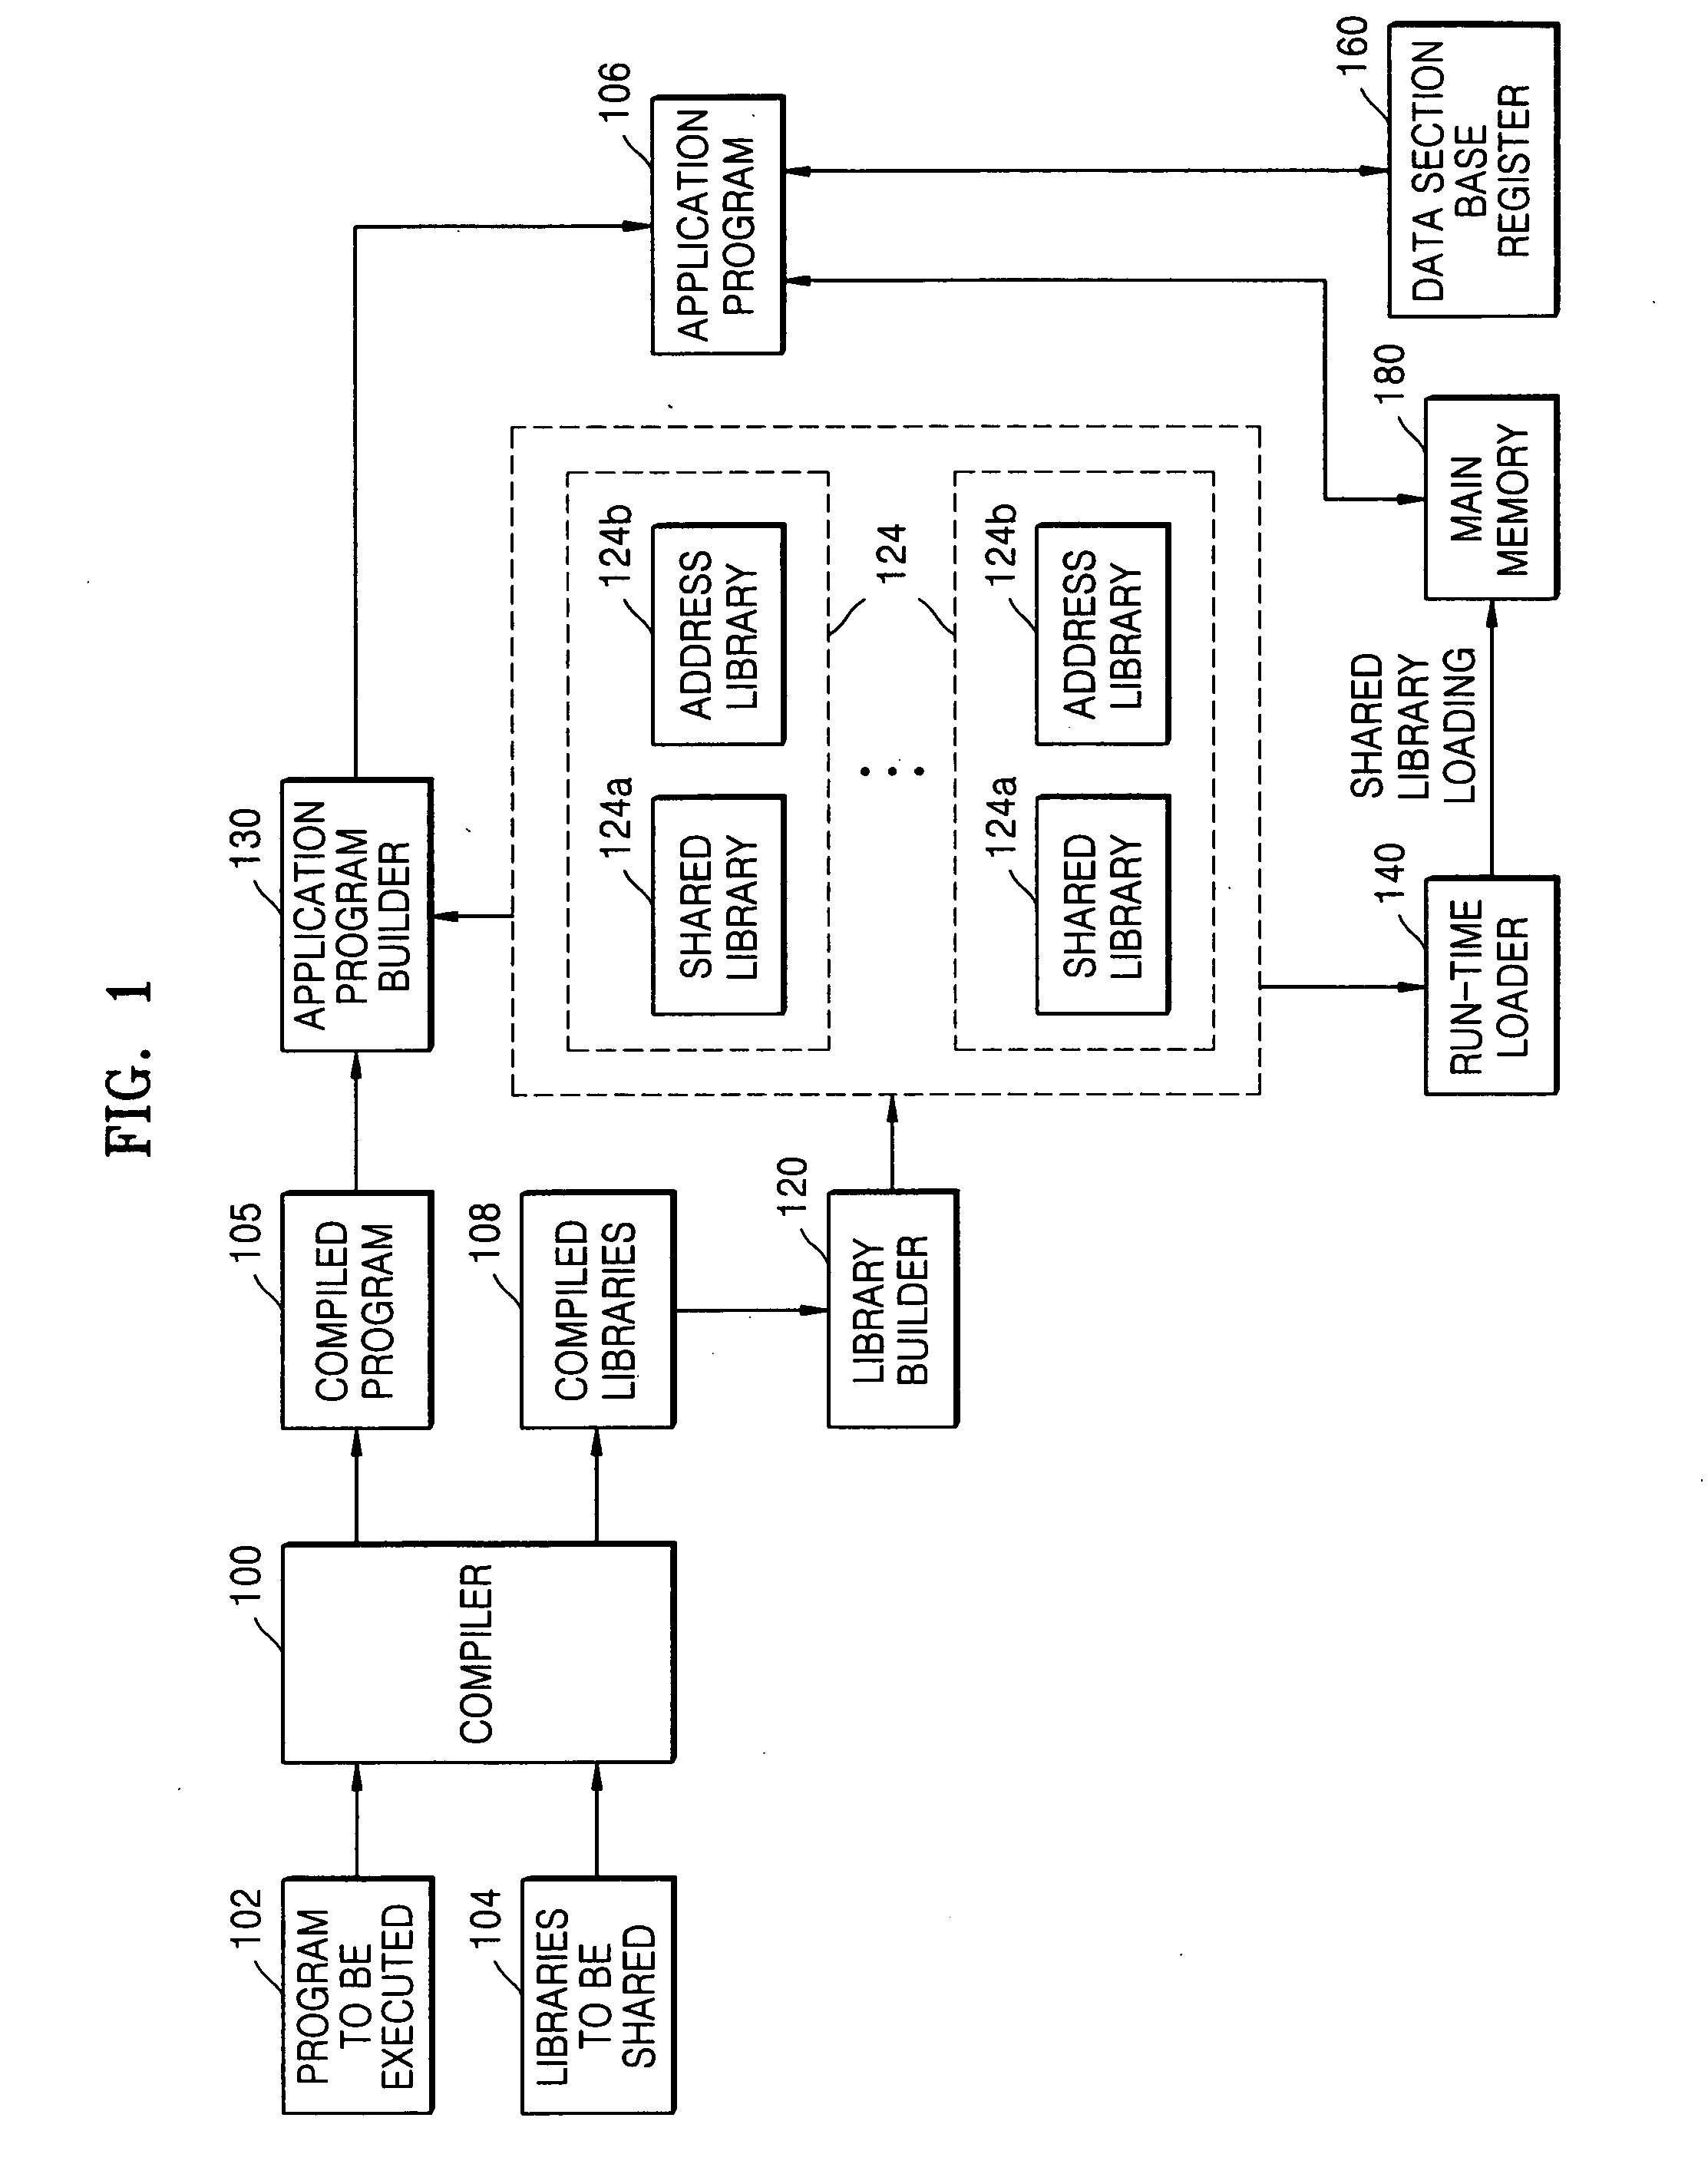 Shared library system and method of building the system